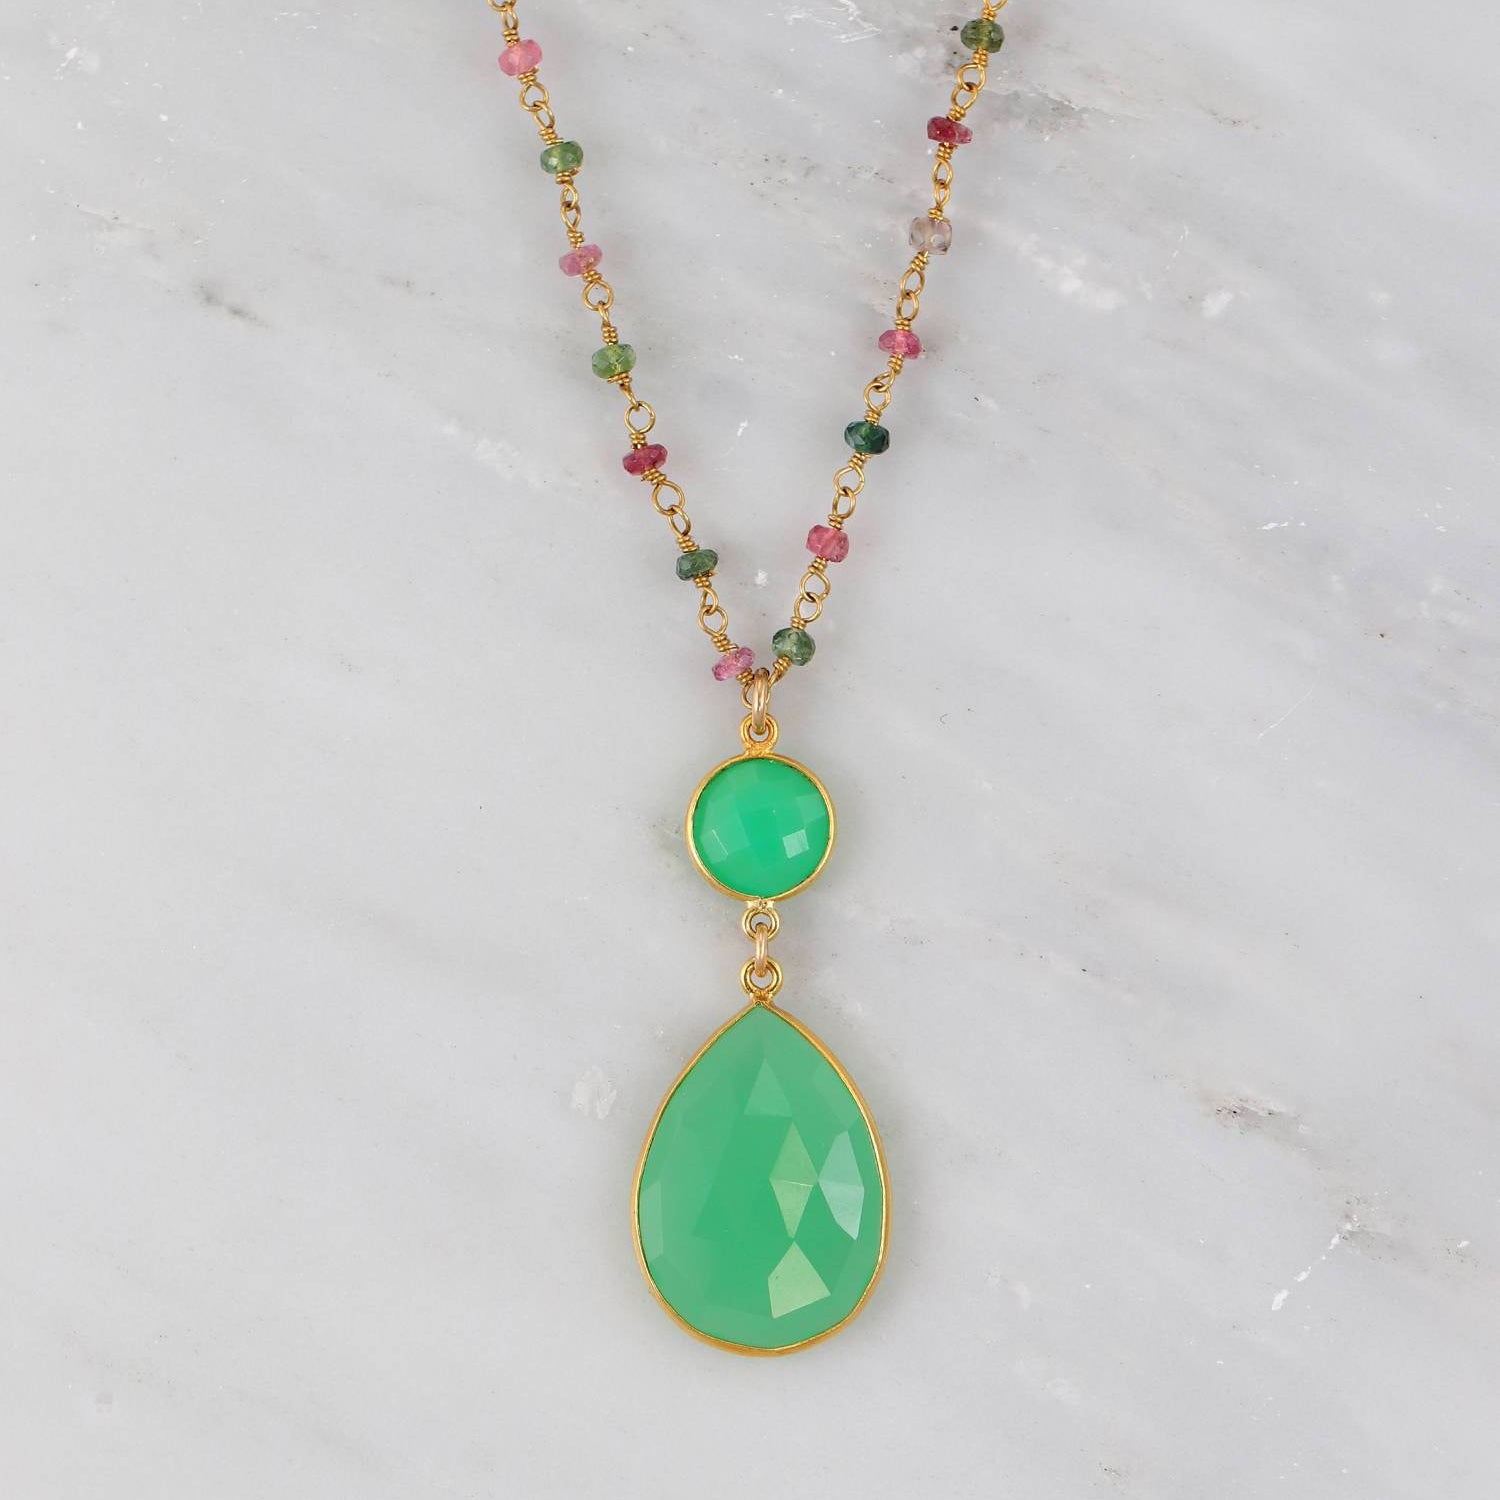 Chrysoprase Necklace, Multi Tourmaline Necklace, Green Teardrop Pendent Necklace, Gold Wire Wrapped Chain Necklace, Large Gemstone Necklace